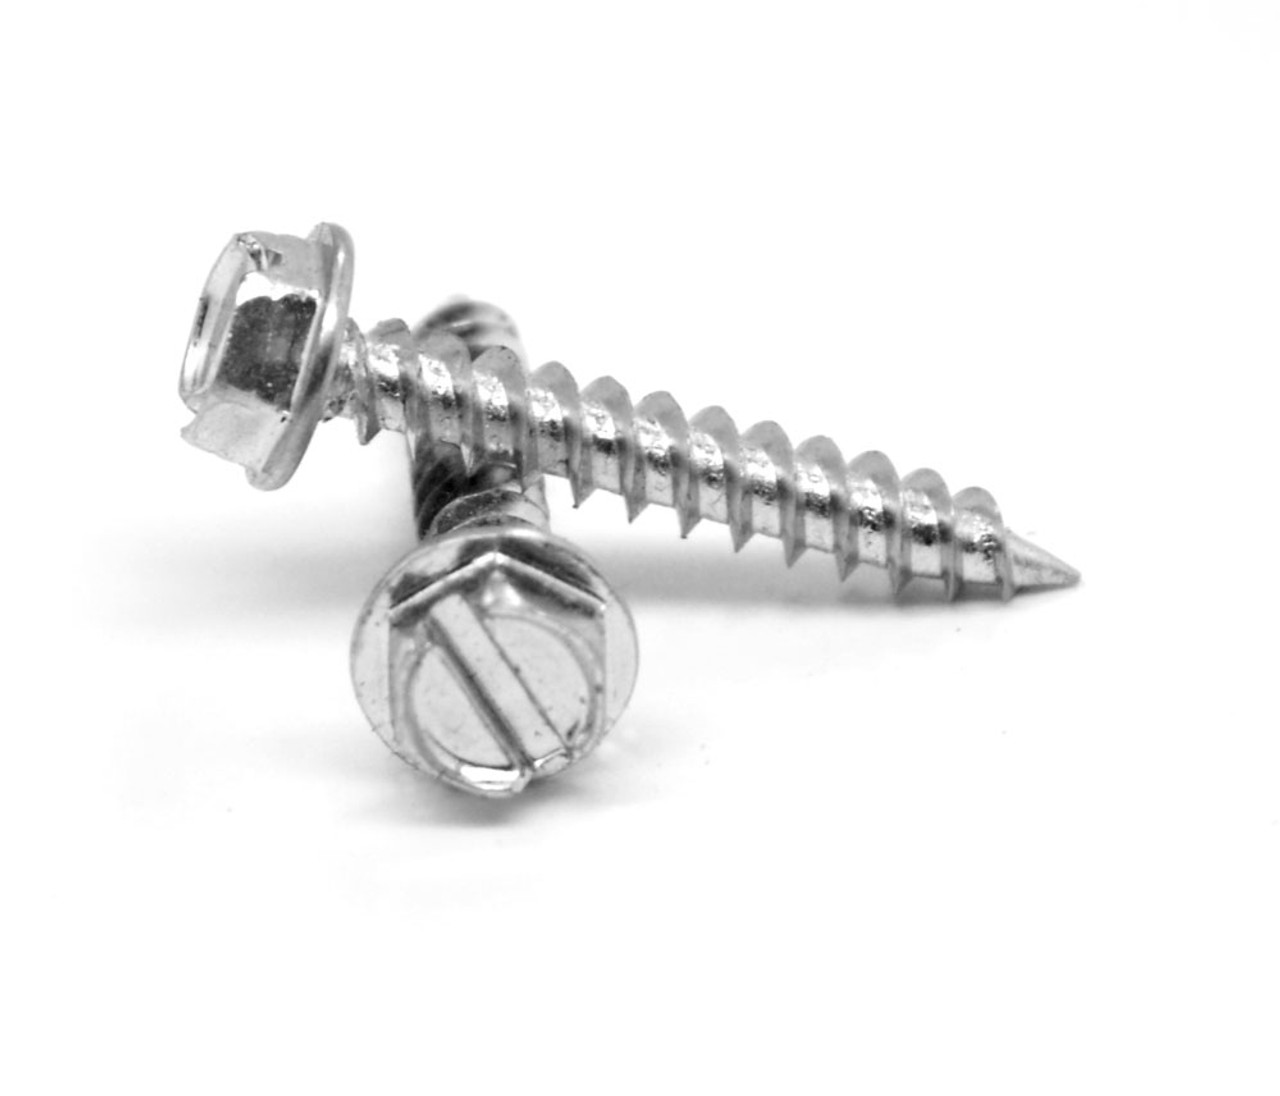 #7-16 x 1/2" (FT) 1/4" AF Self-Piercing Sheet Metal Screw Slotted Hex Washer Head Low Carbon Steel Zinc Plated